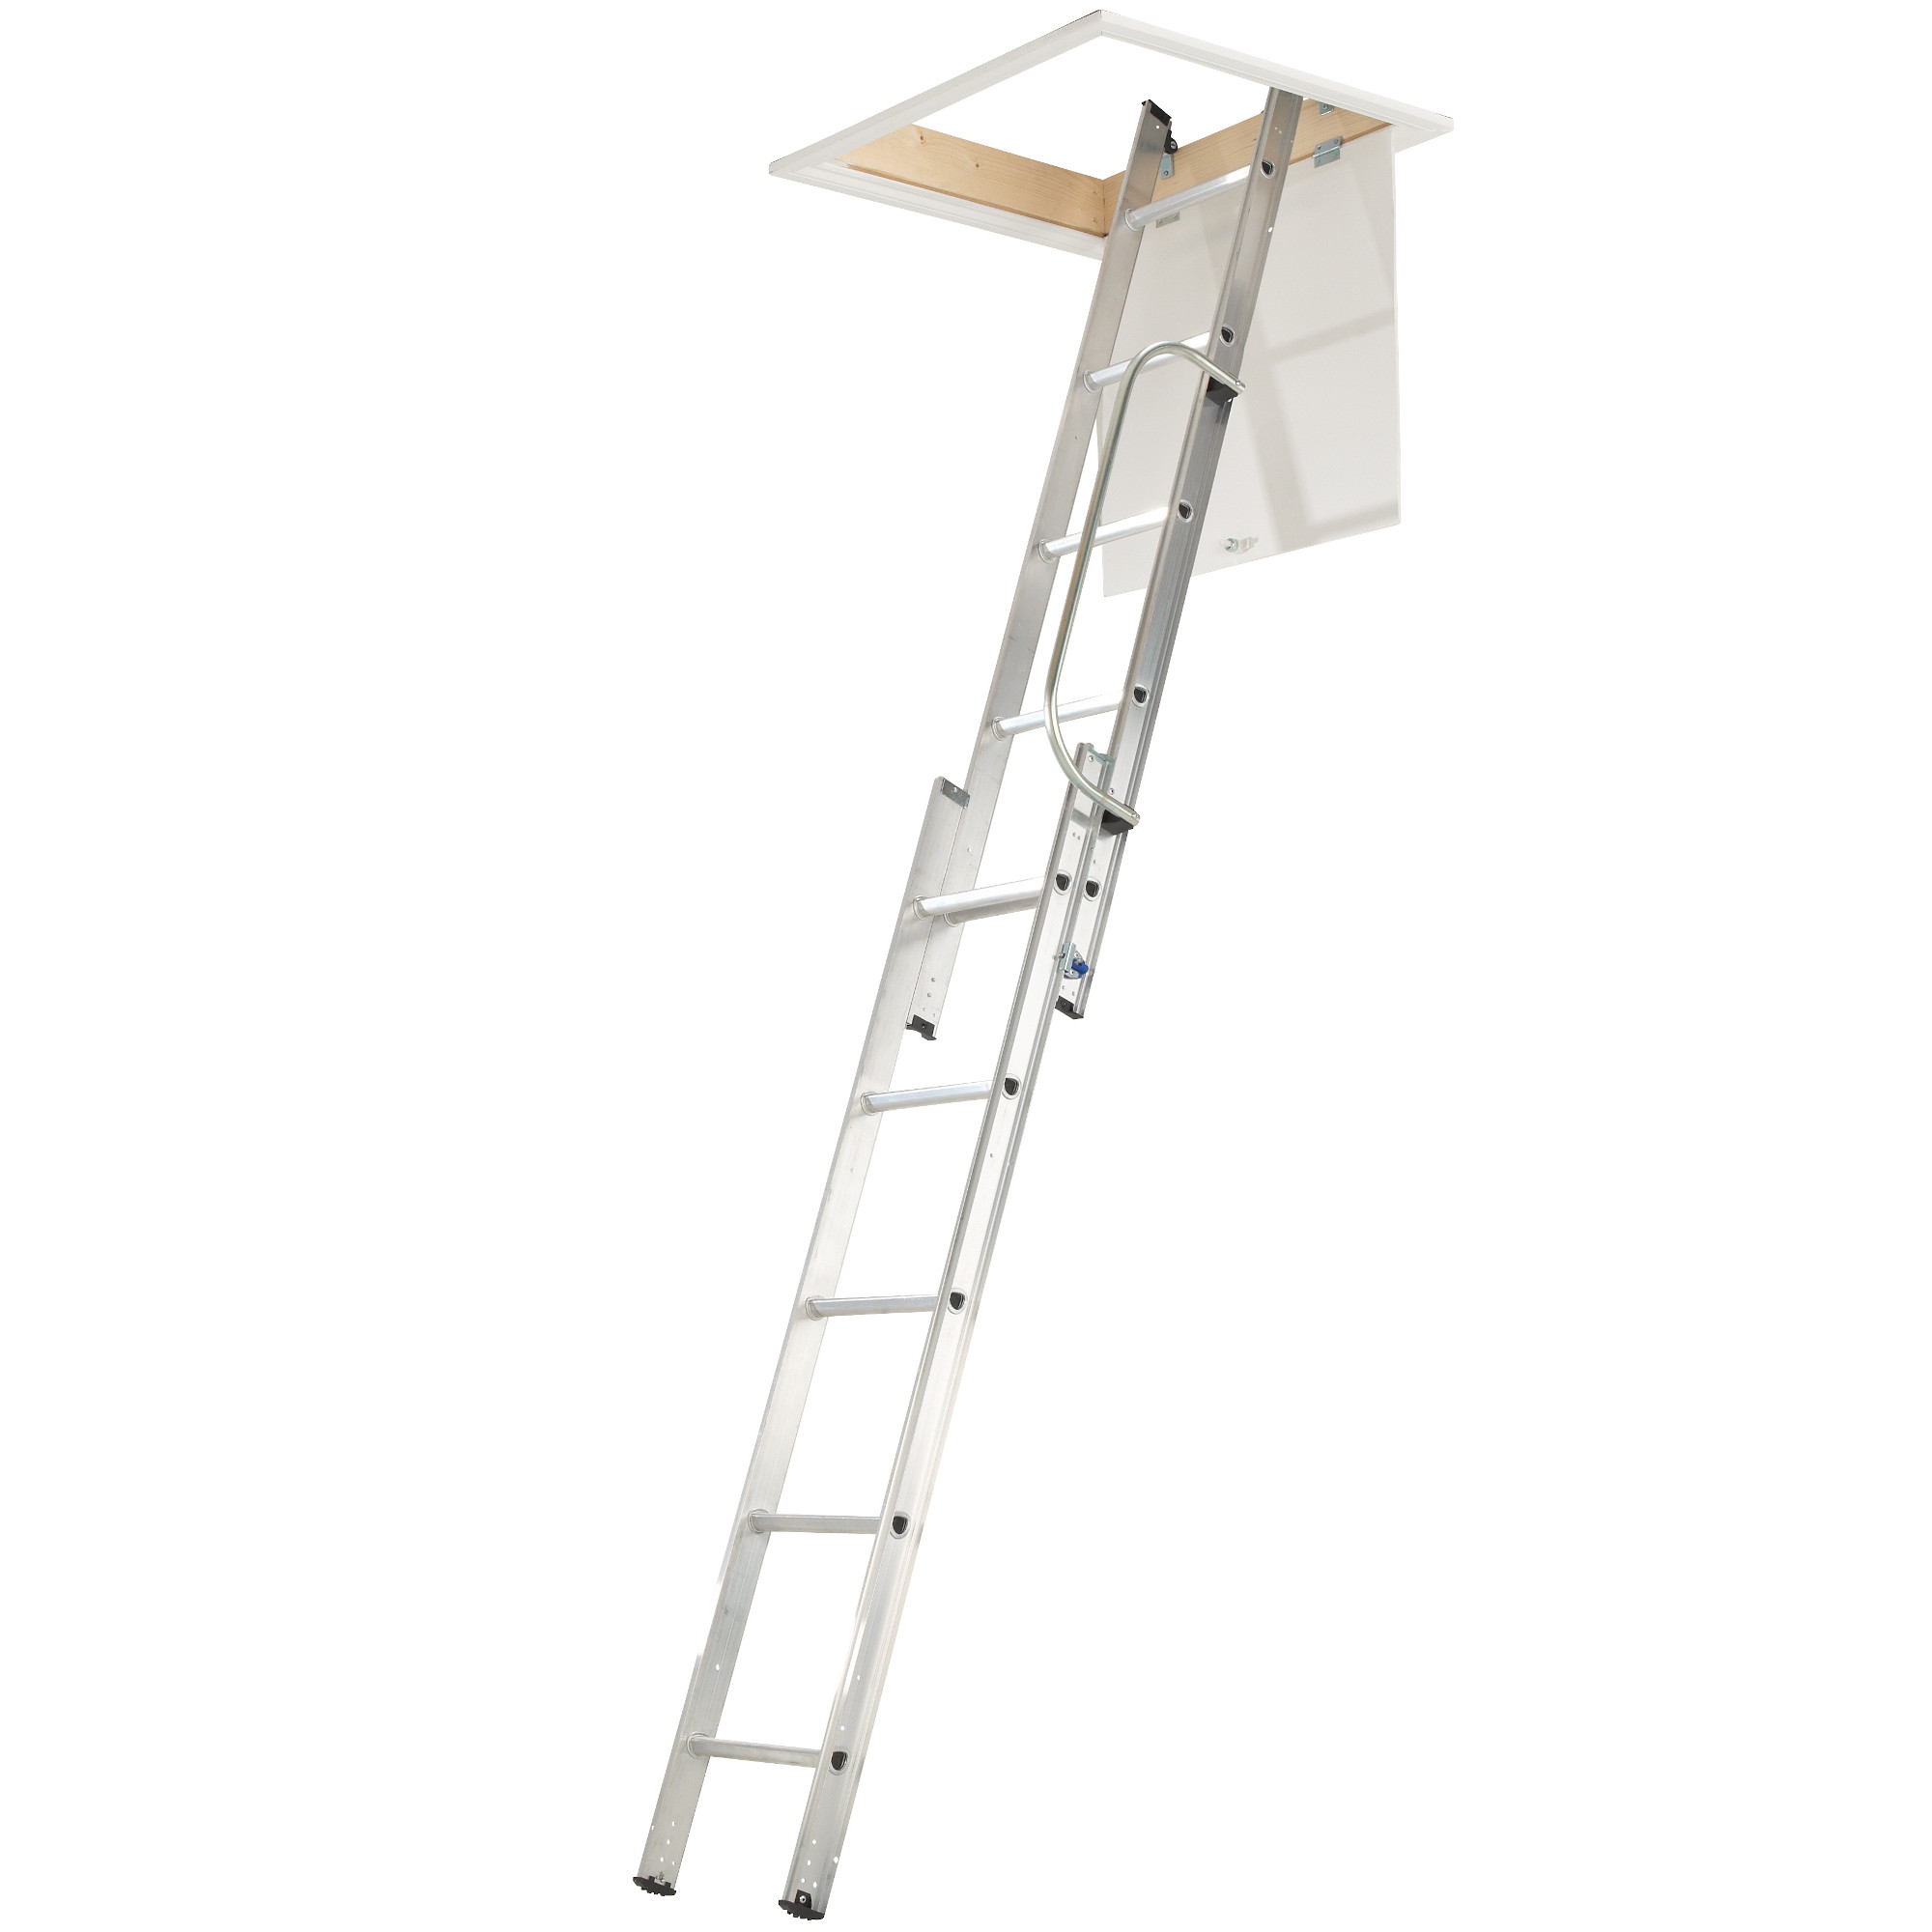 Werner 2 Section Loft Ladder With Handrail